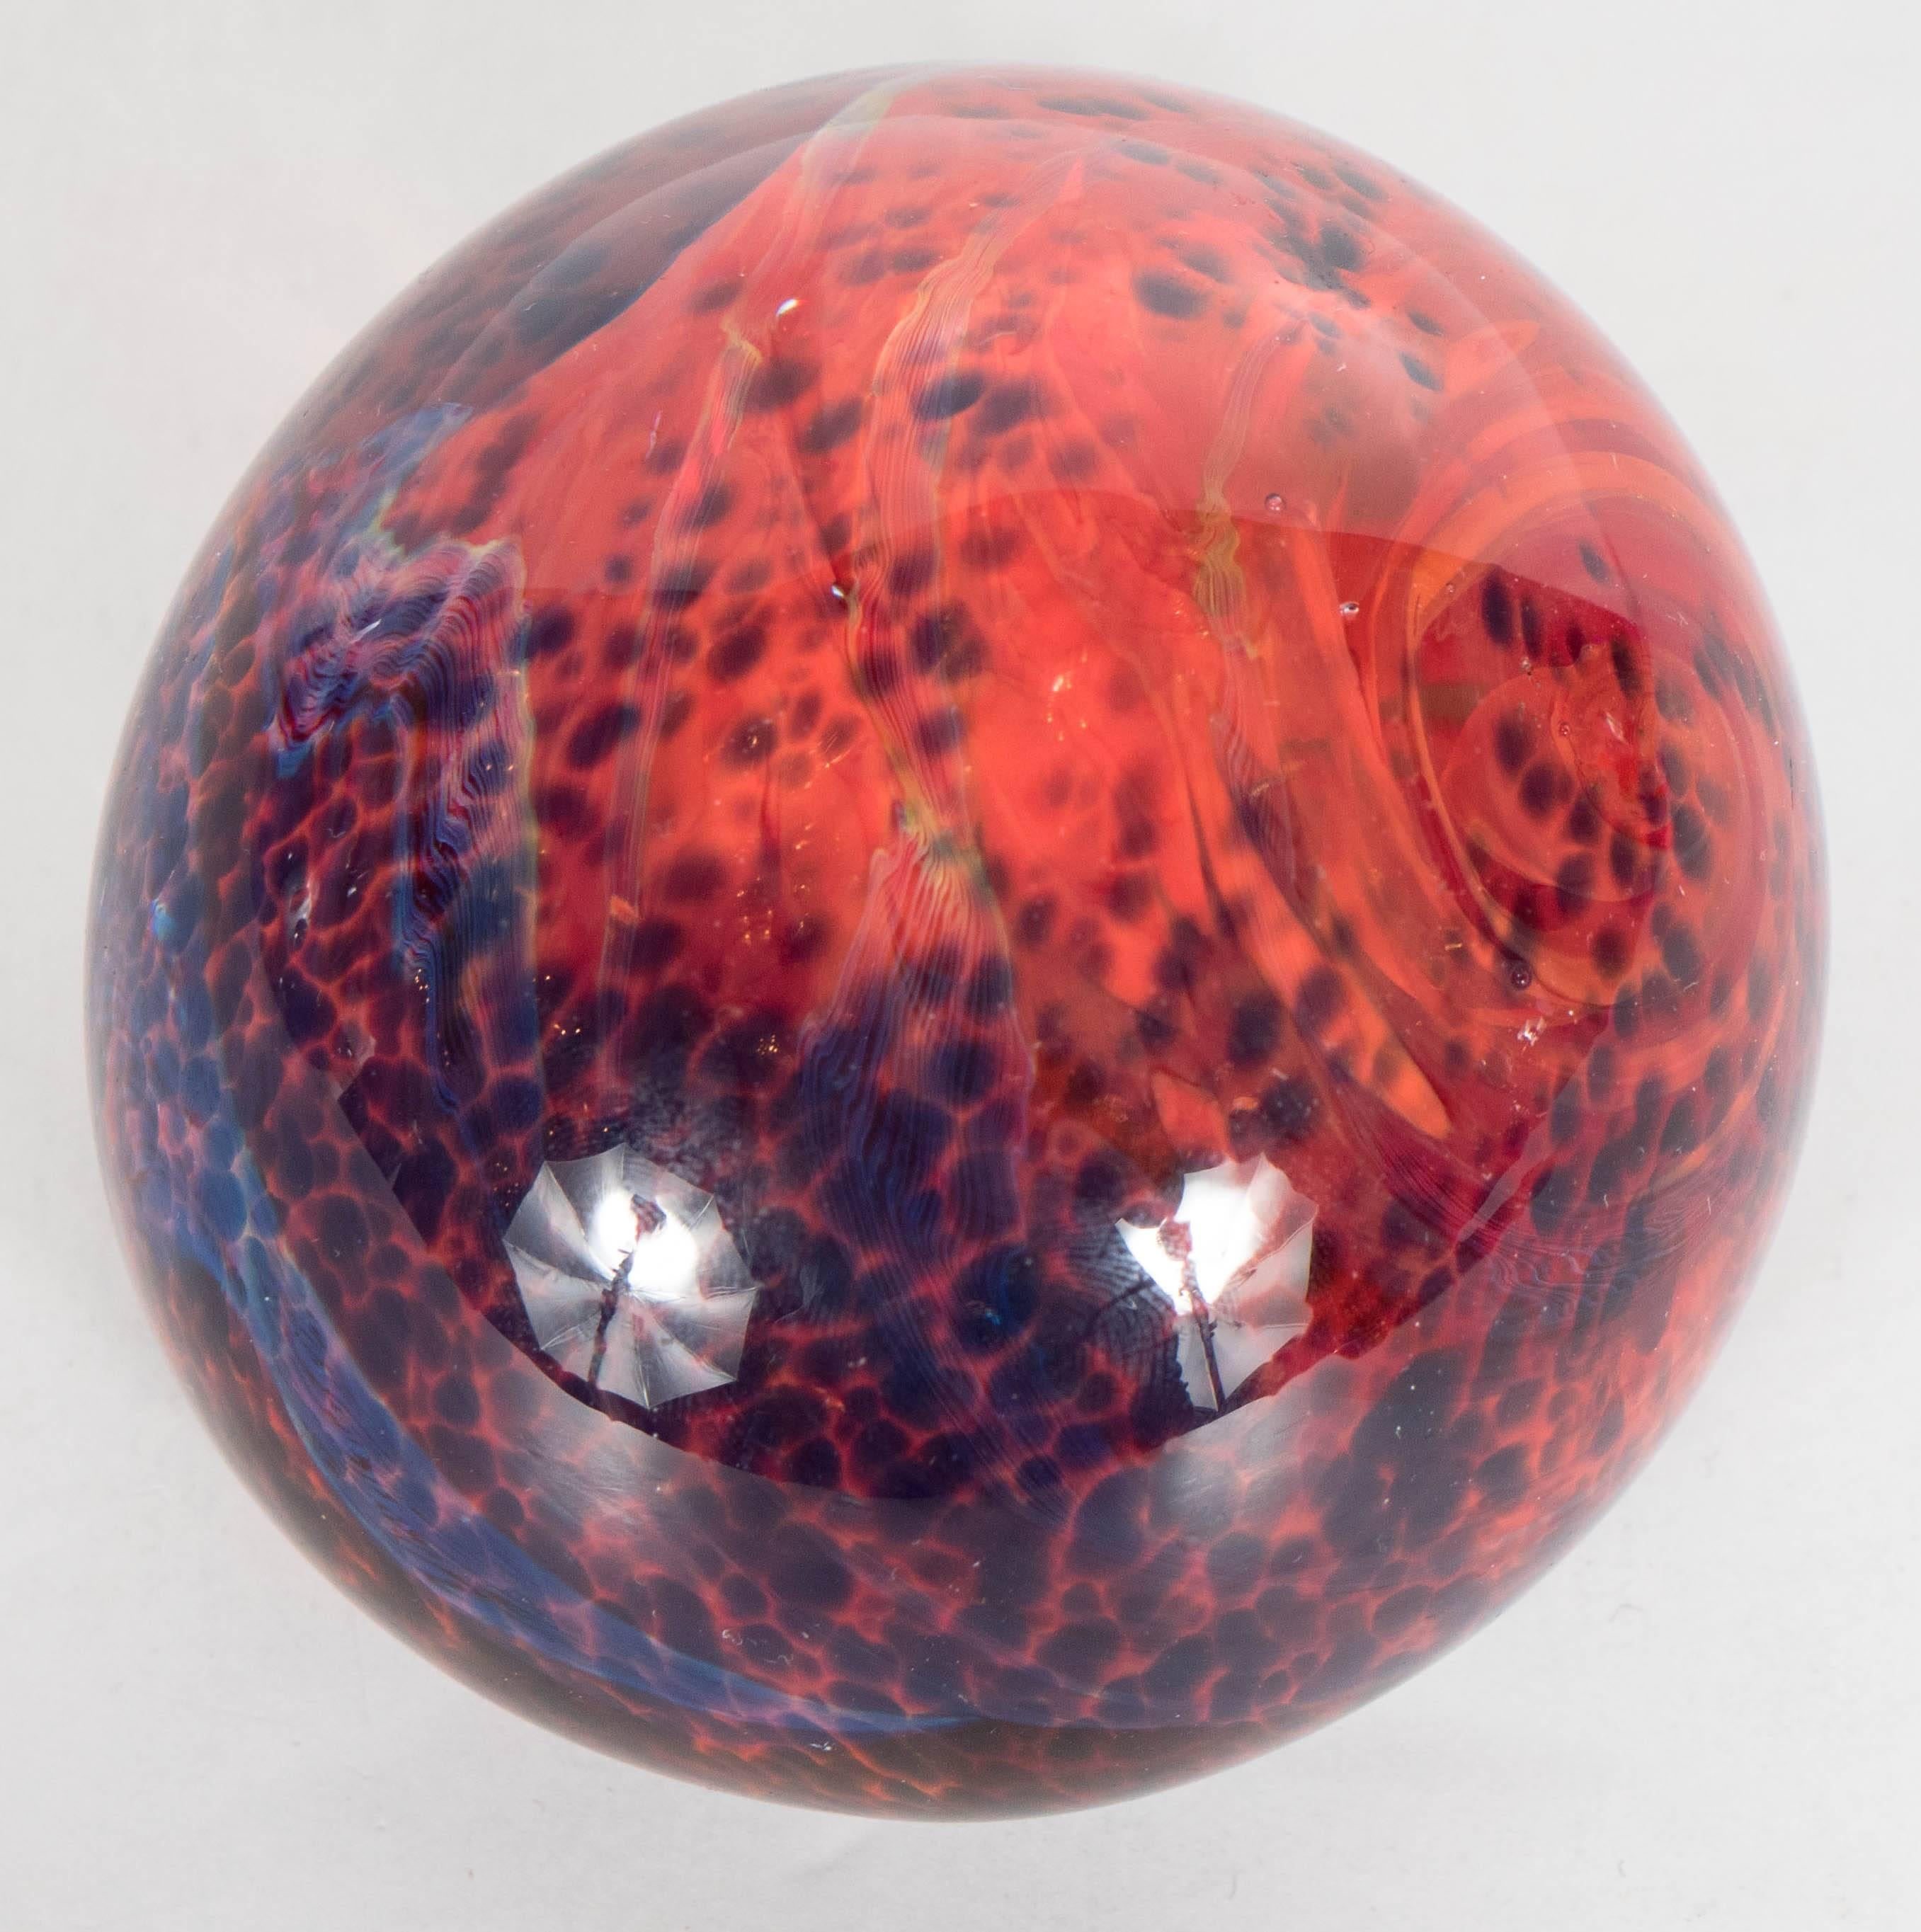 This gorgeous Mid-Century Modernist paperweight was blown by hand in Murano, Italy. It features constellations of cobalt blue specks and swirls of carnelian red suspended in translucent glass. This paperweight would be perfect for a desk at work as